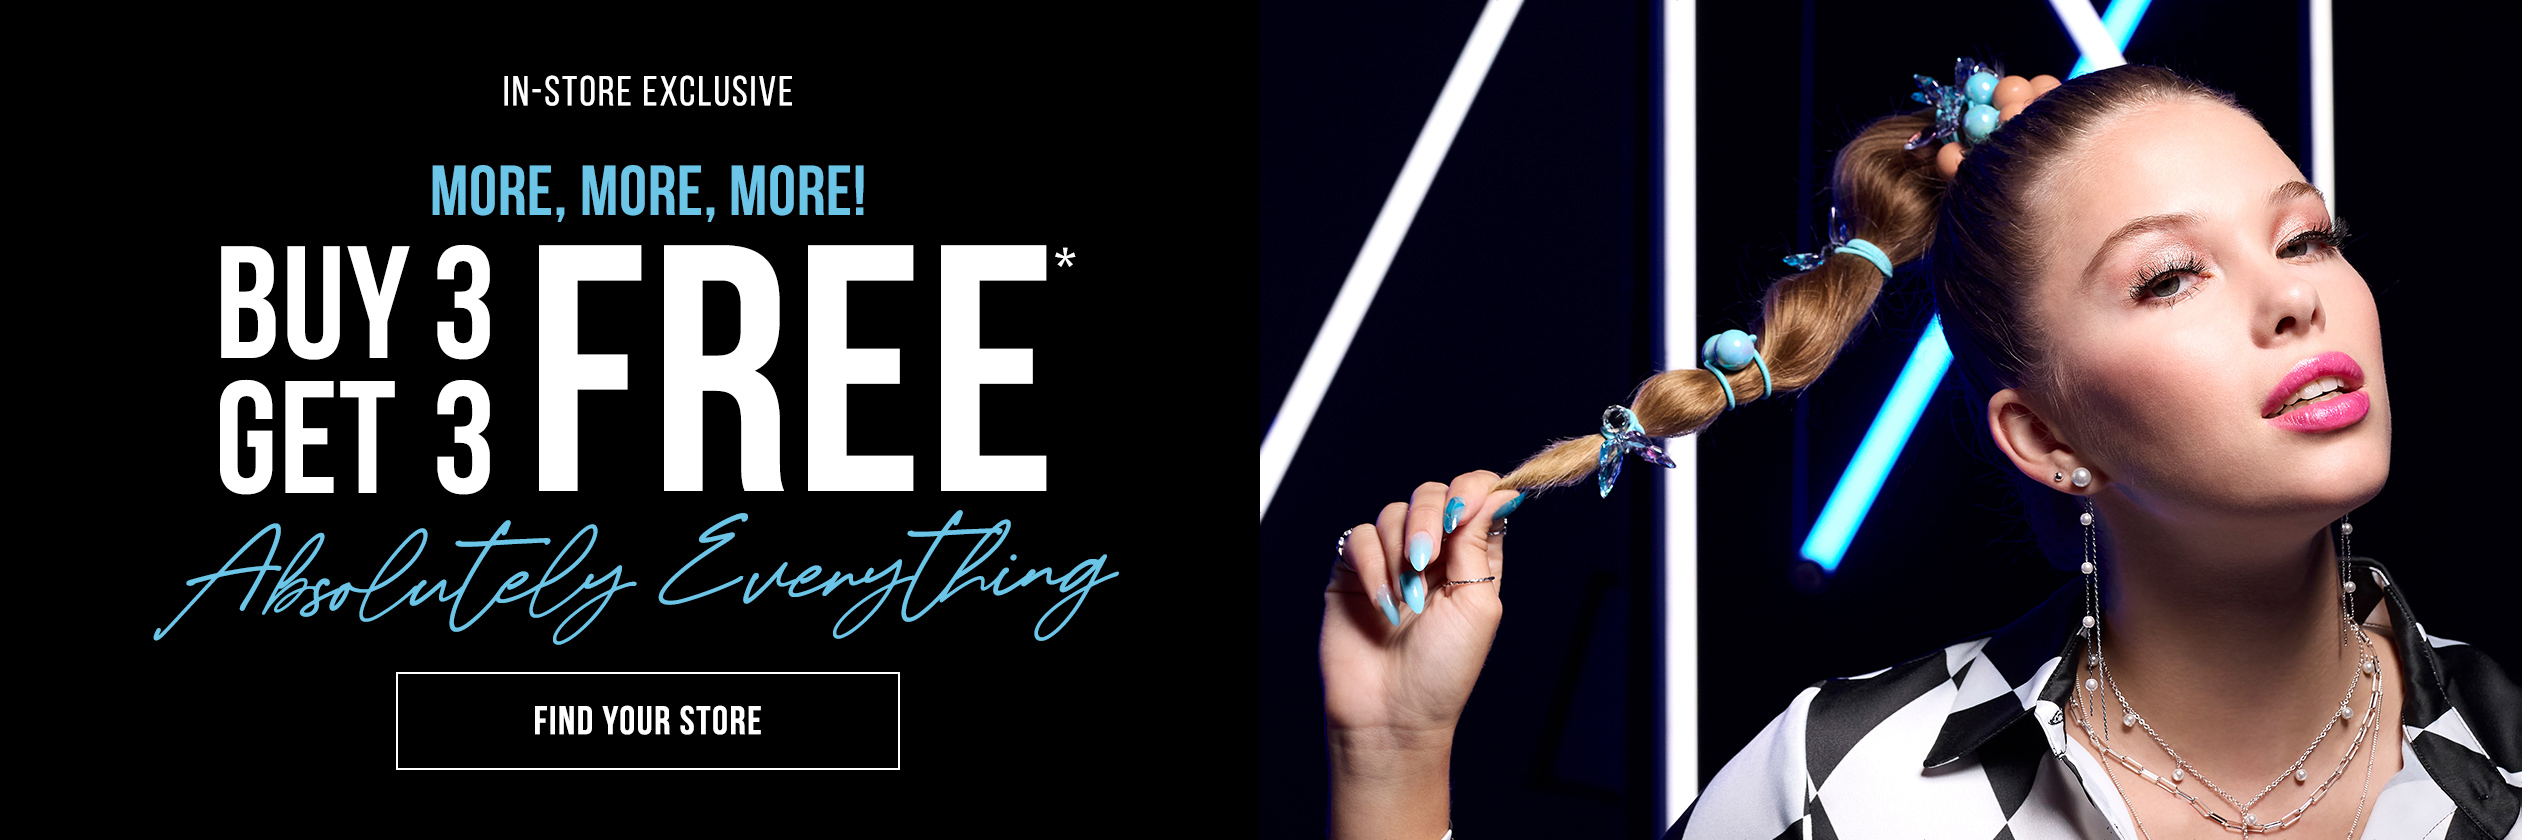 In-Store Exclusive More More More! Buy 3 Get 3 Free Absolutely Everything